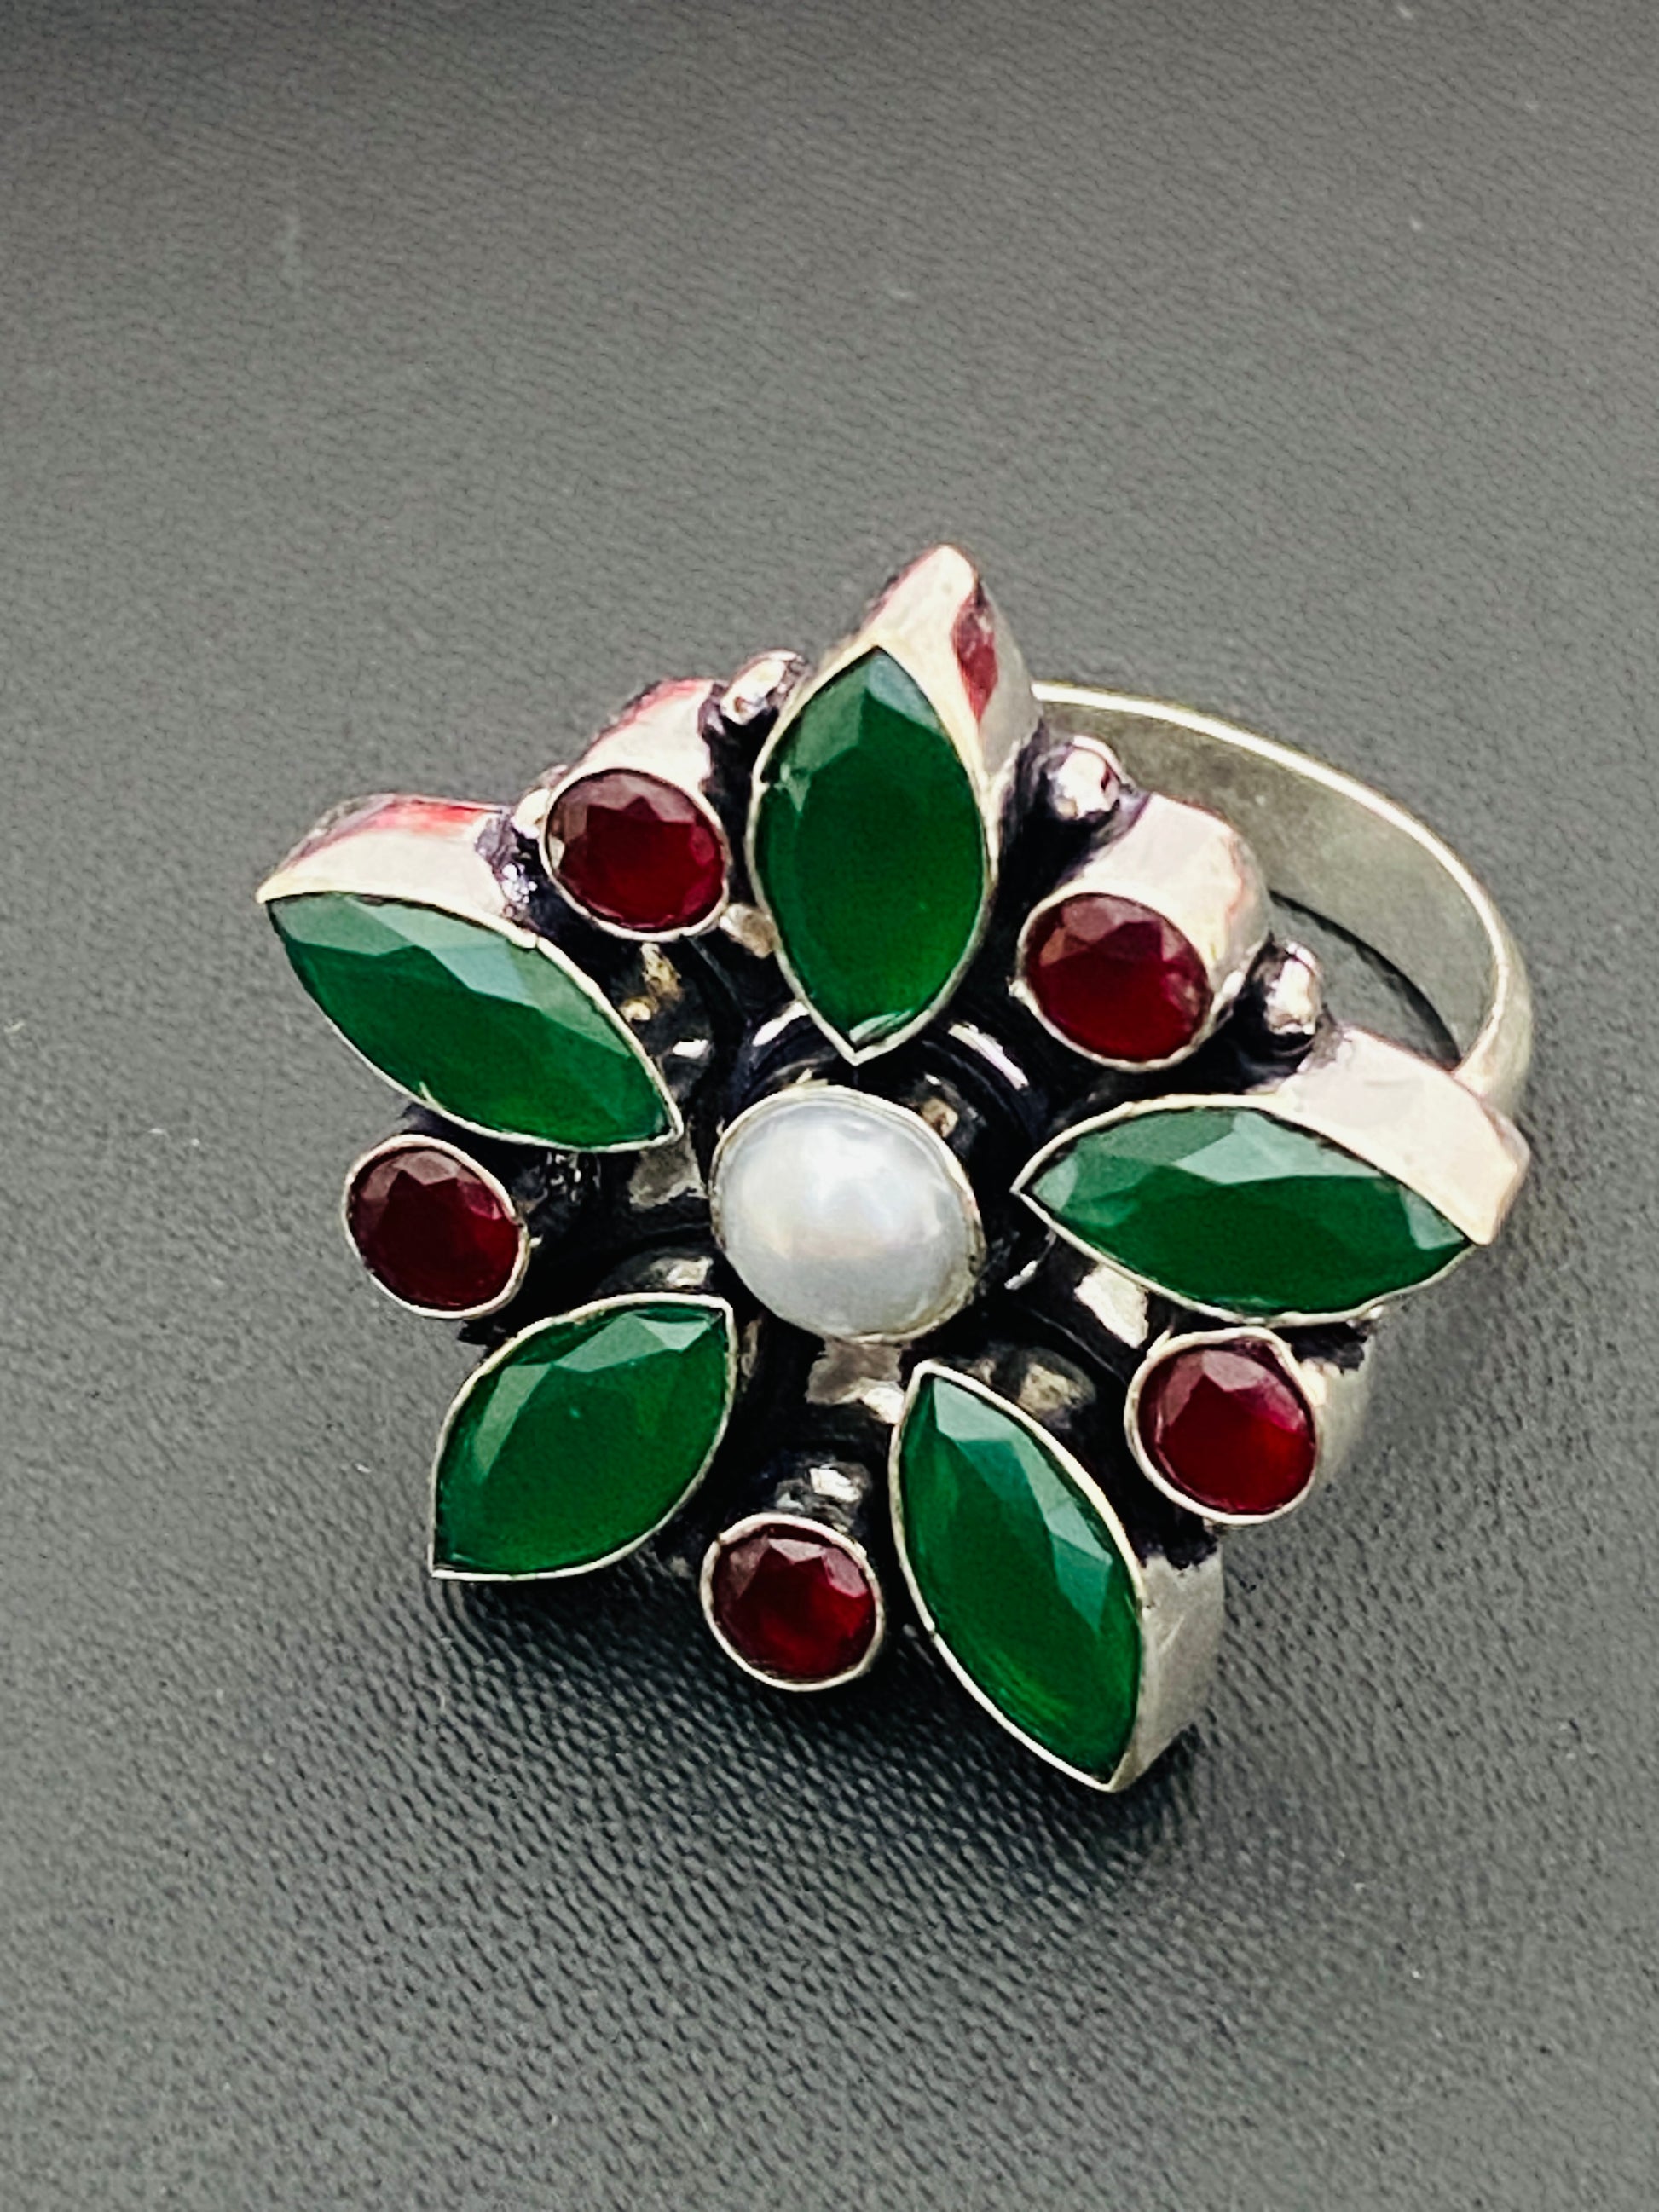  Designer Ring With Pearl Bead For Women in Williams